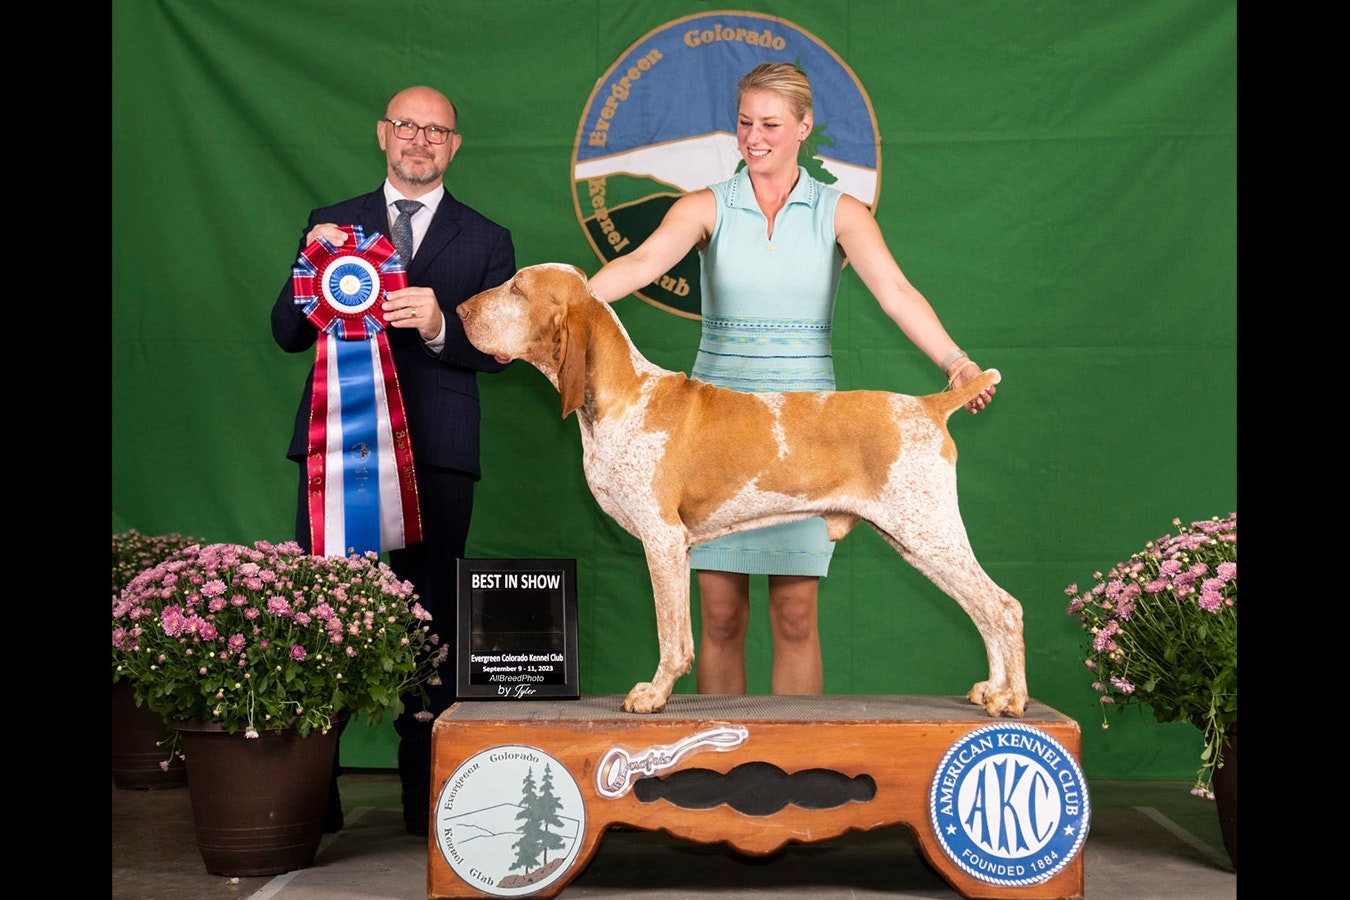 Rowan was named Best in Show at the Evergreen Colorado Kennel Club during a competition in September.